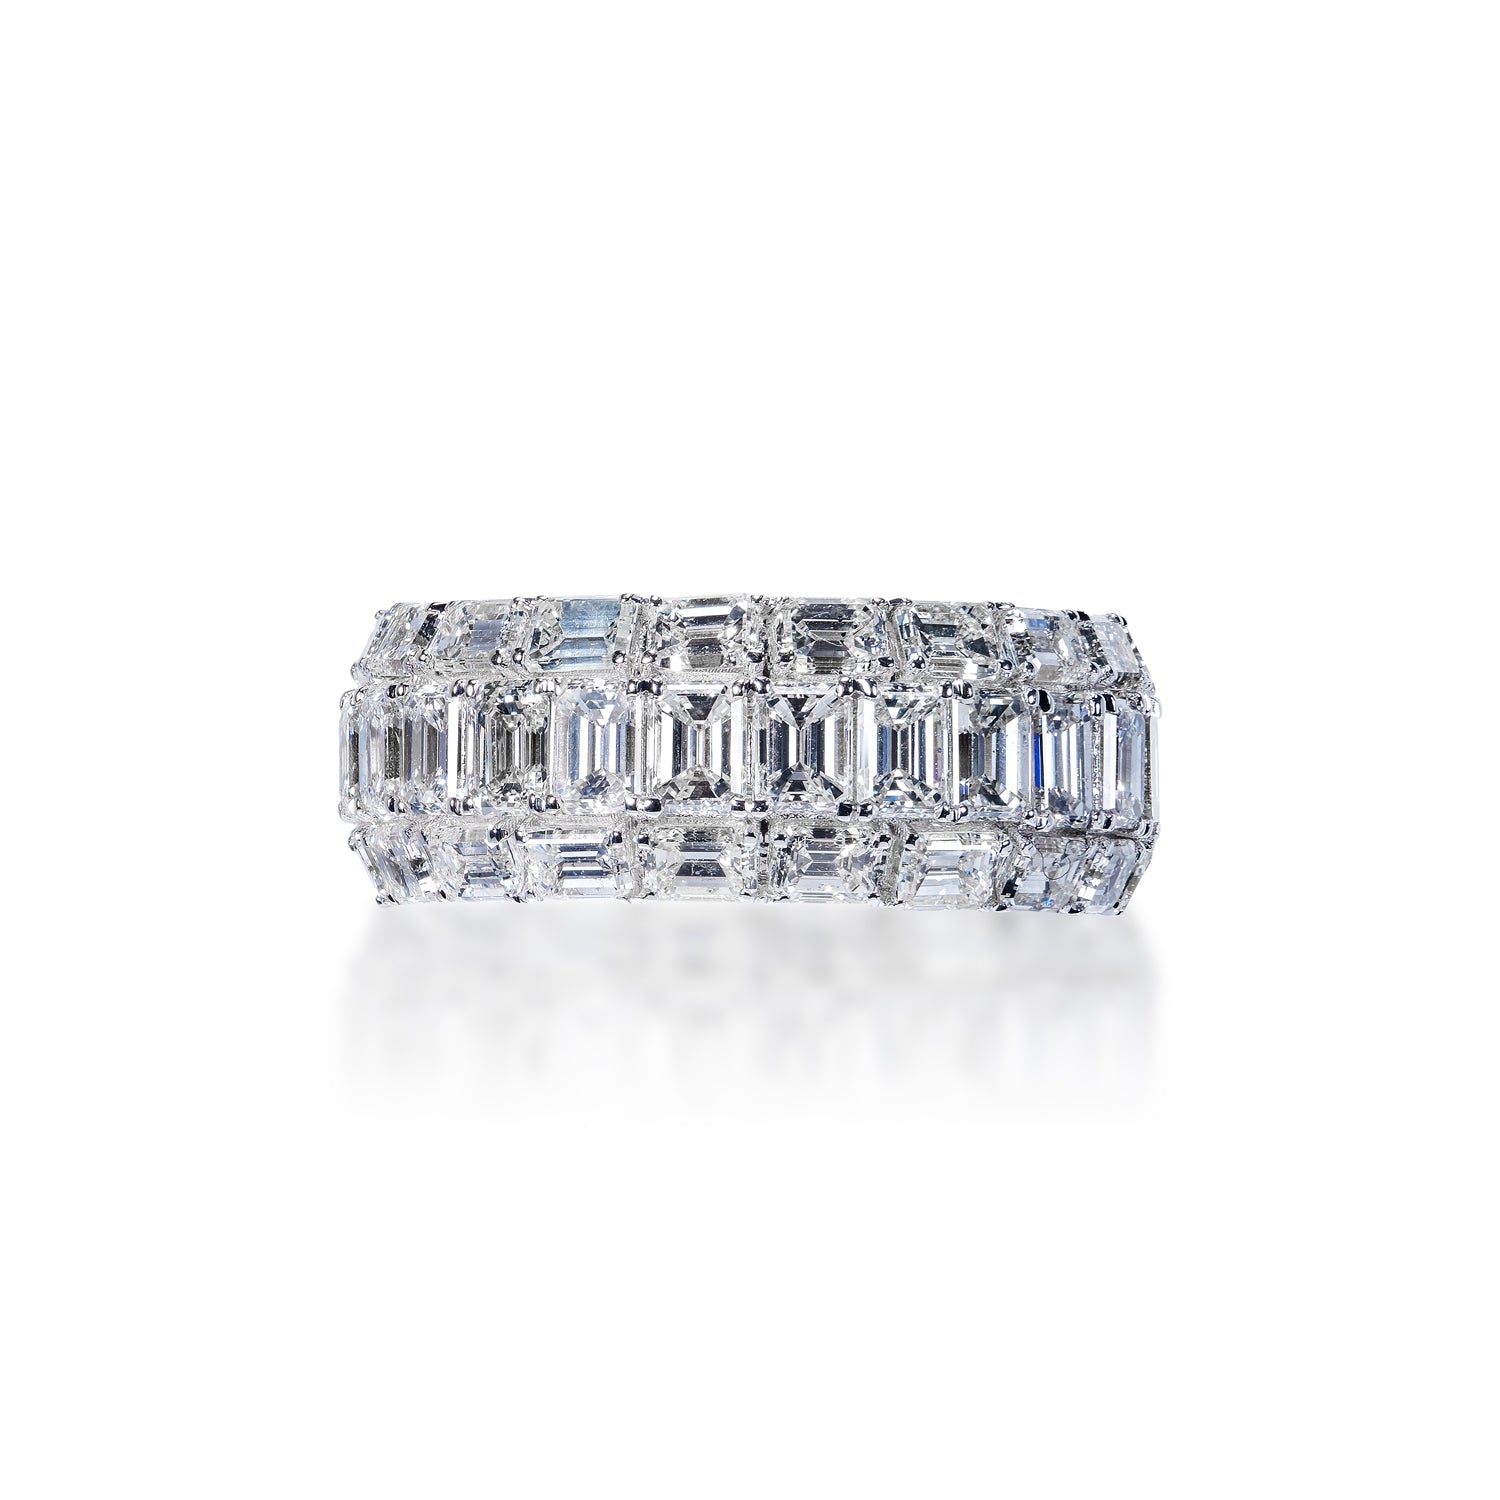 Elisa 7 Carat Emerald Cut Diamond Eternity Band in 18k White Gold Shared Prong Front View